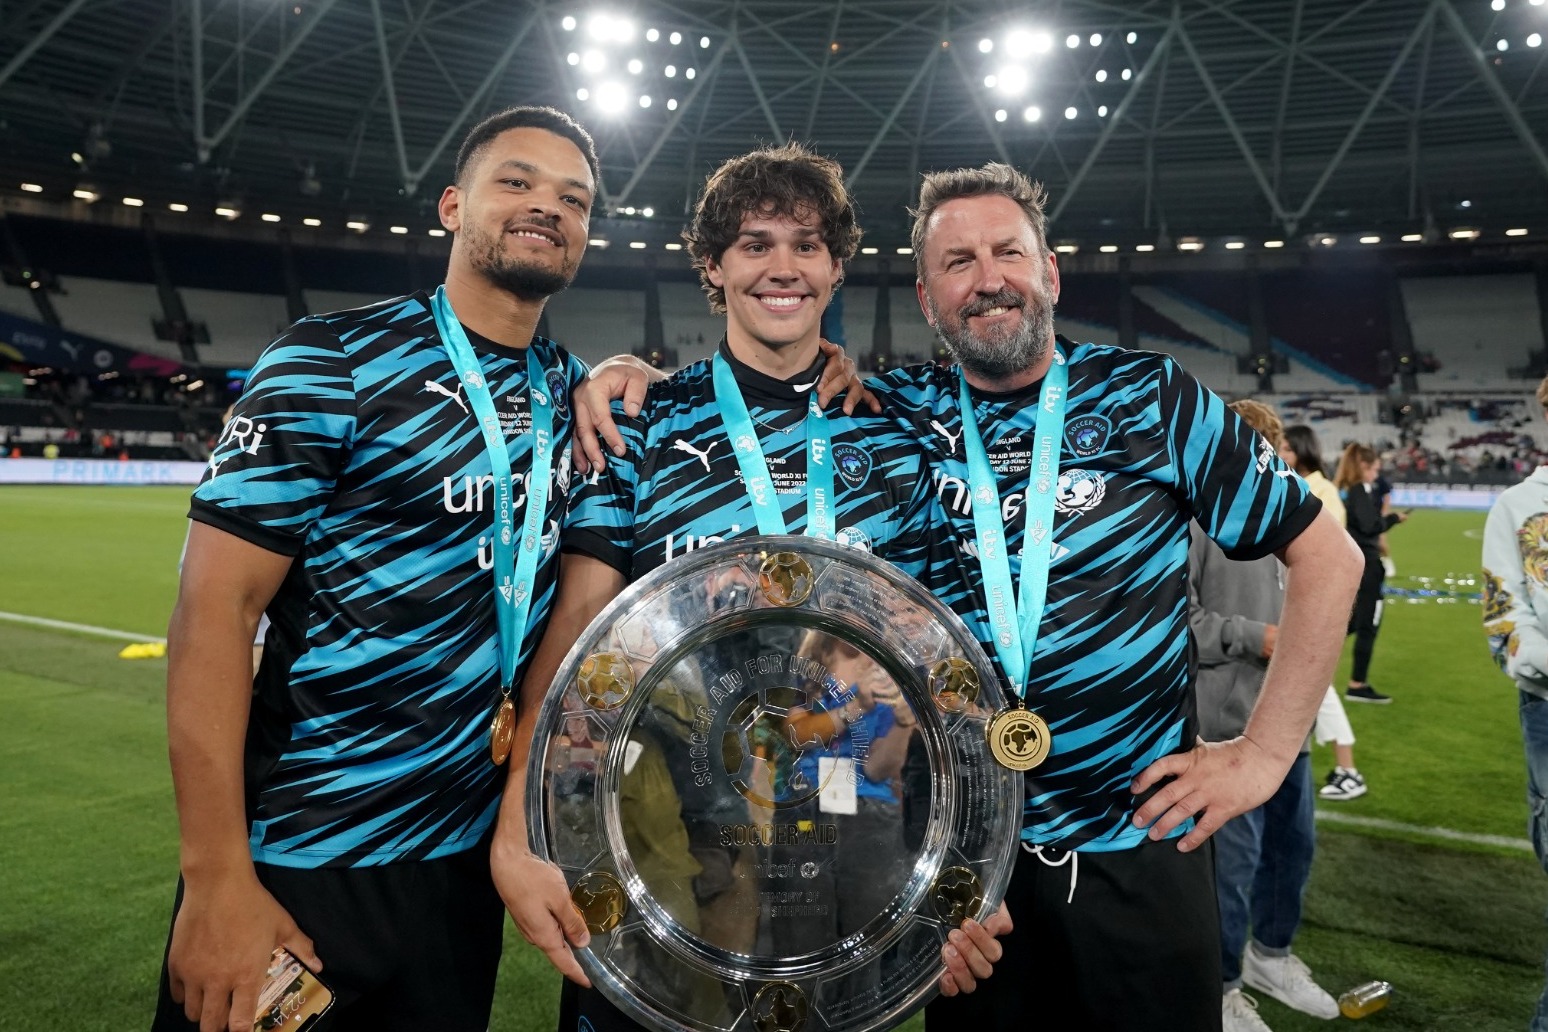 World XI beat England on penalties to win Unicef’s Soccer Aid 